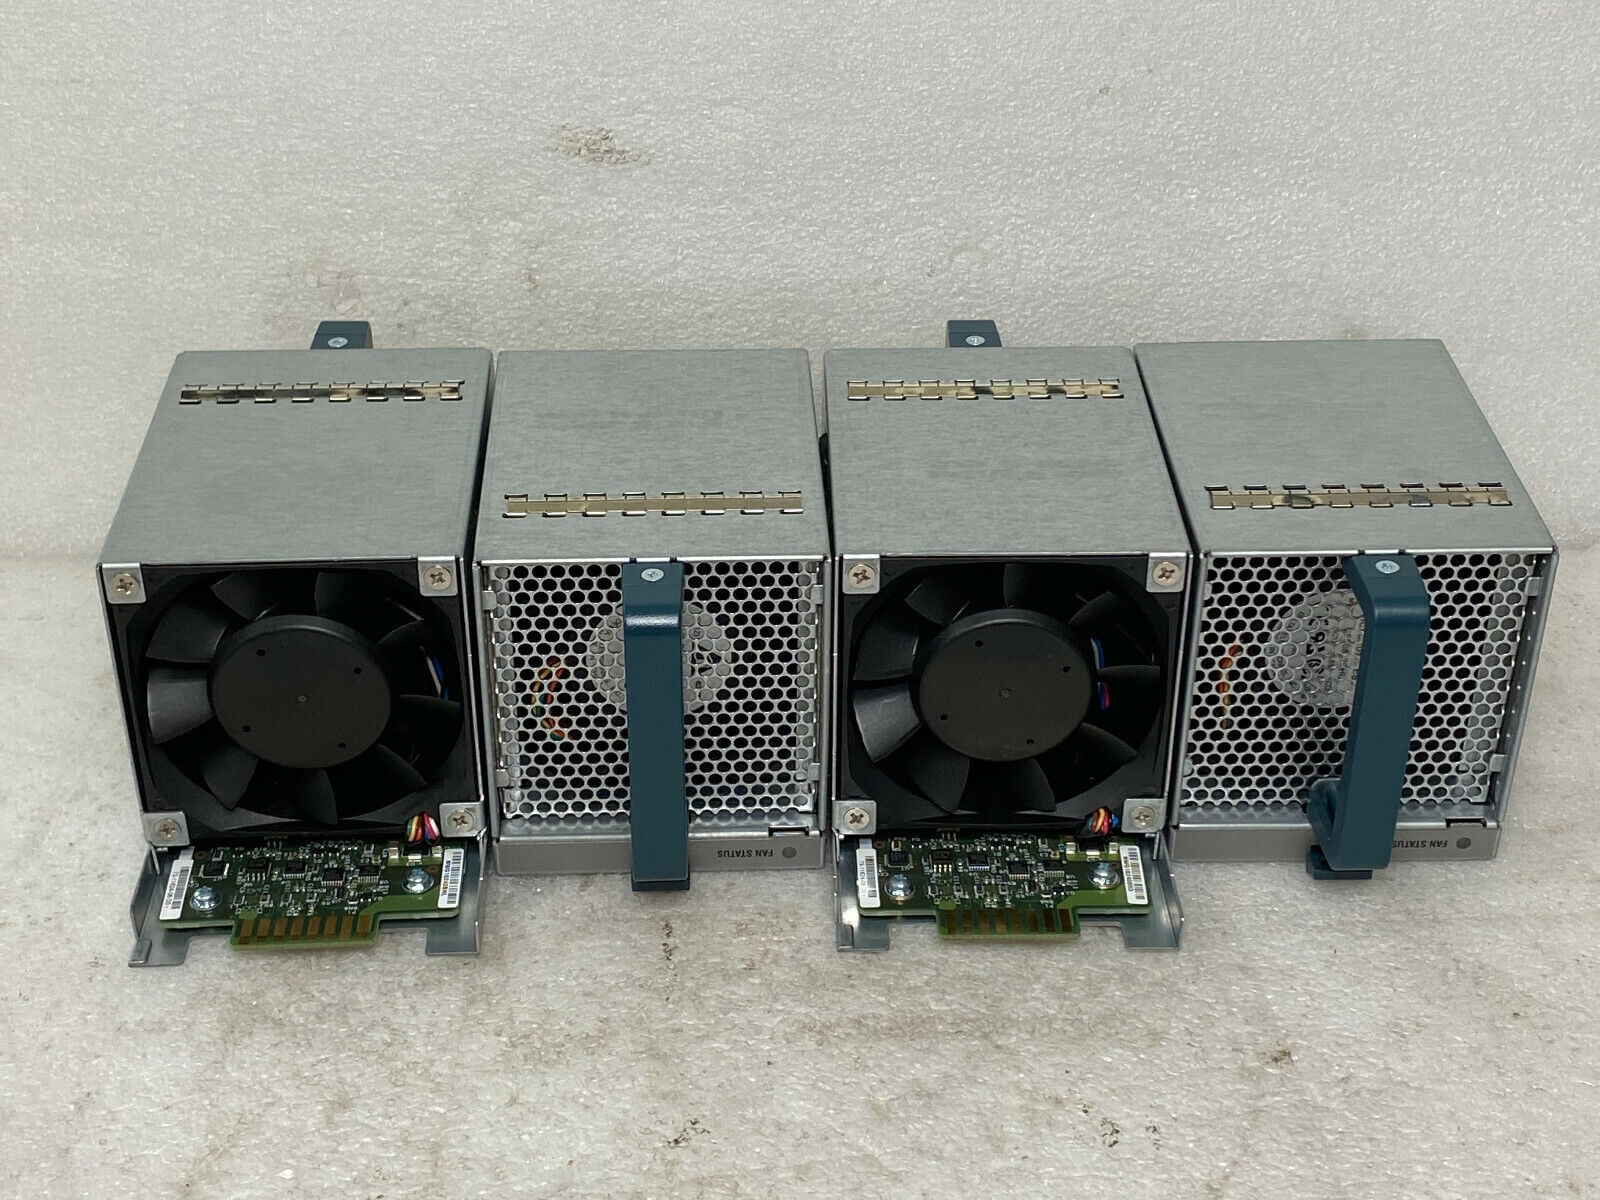 Lot of 4 | Cisco N20-FAN5 V02 800-30208-06 For UCS 5108 Blade Server Chassis T11